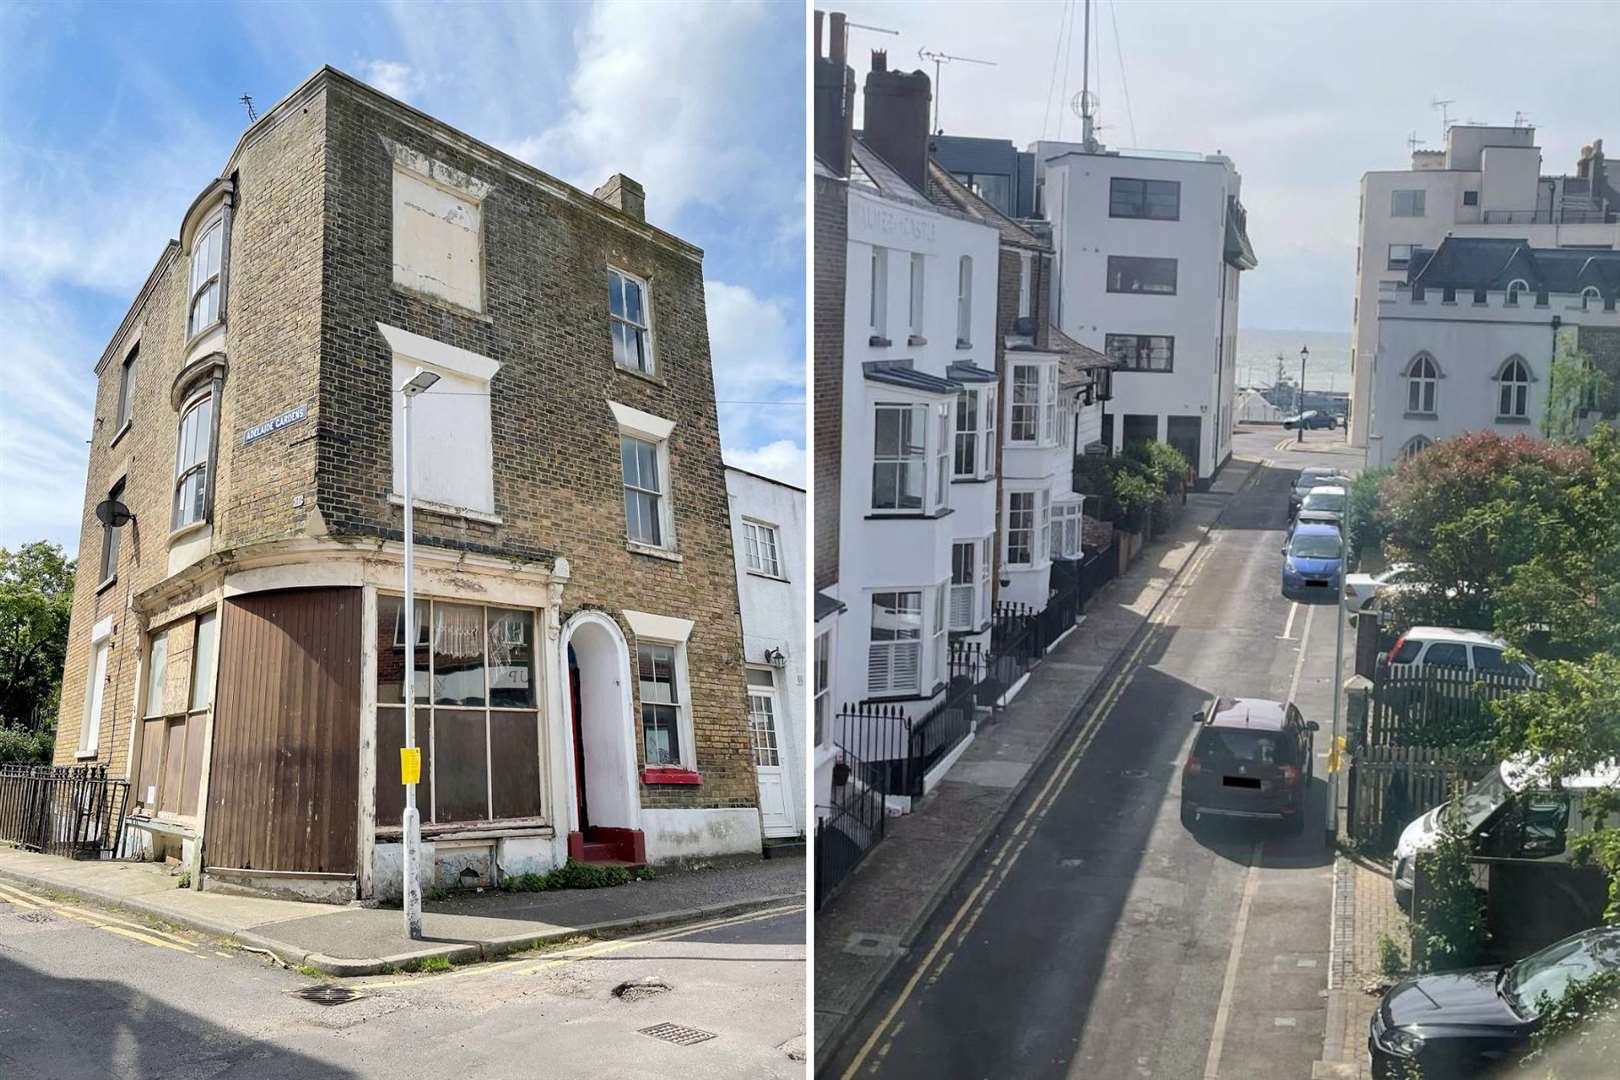 18 Albert Street in Ramsgate went up for auction for £110-£120,000 and boasts sea views. Picture: Clive Emson